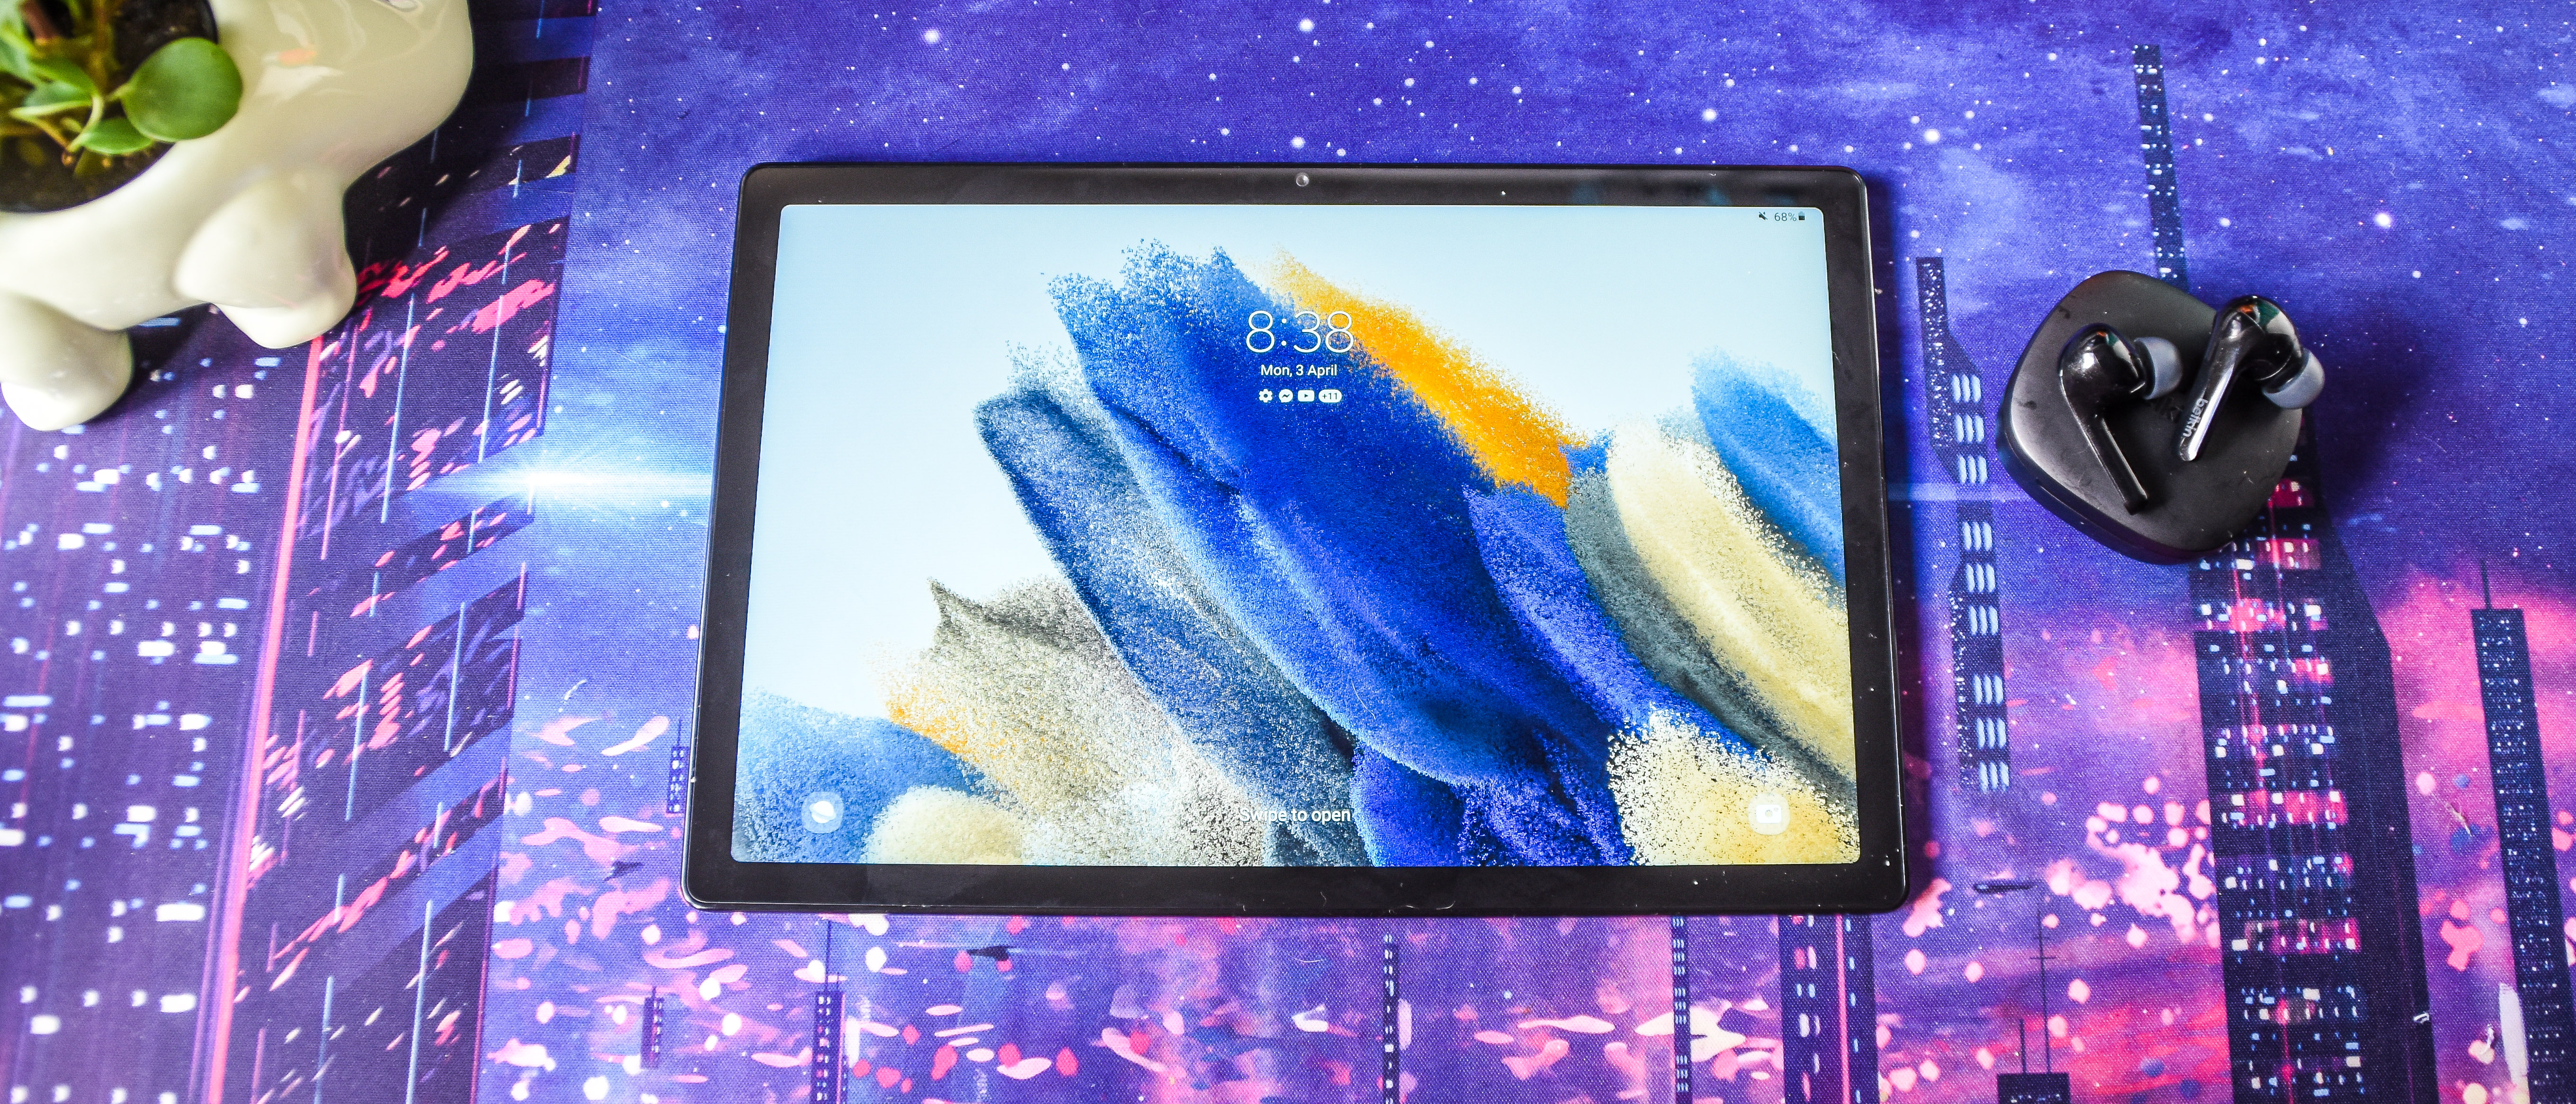 Samsung Galaxy Tab A8 review: budget tablet with a beautiful